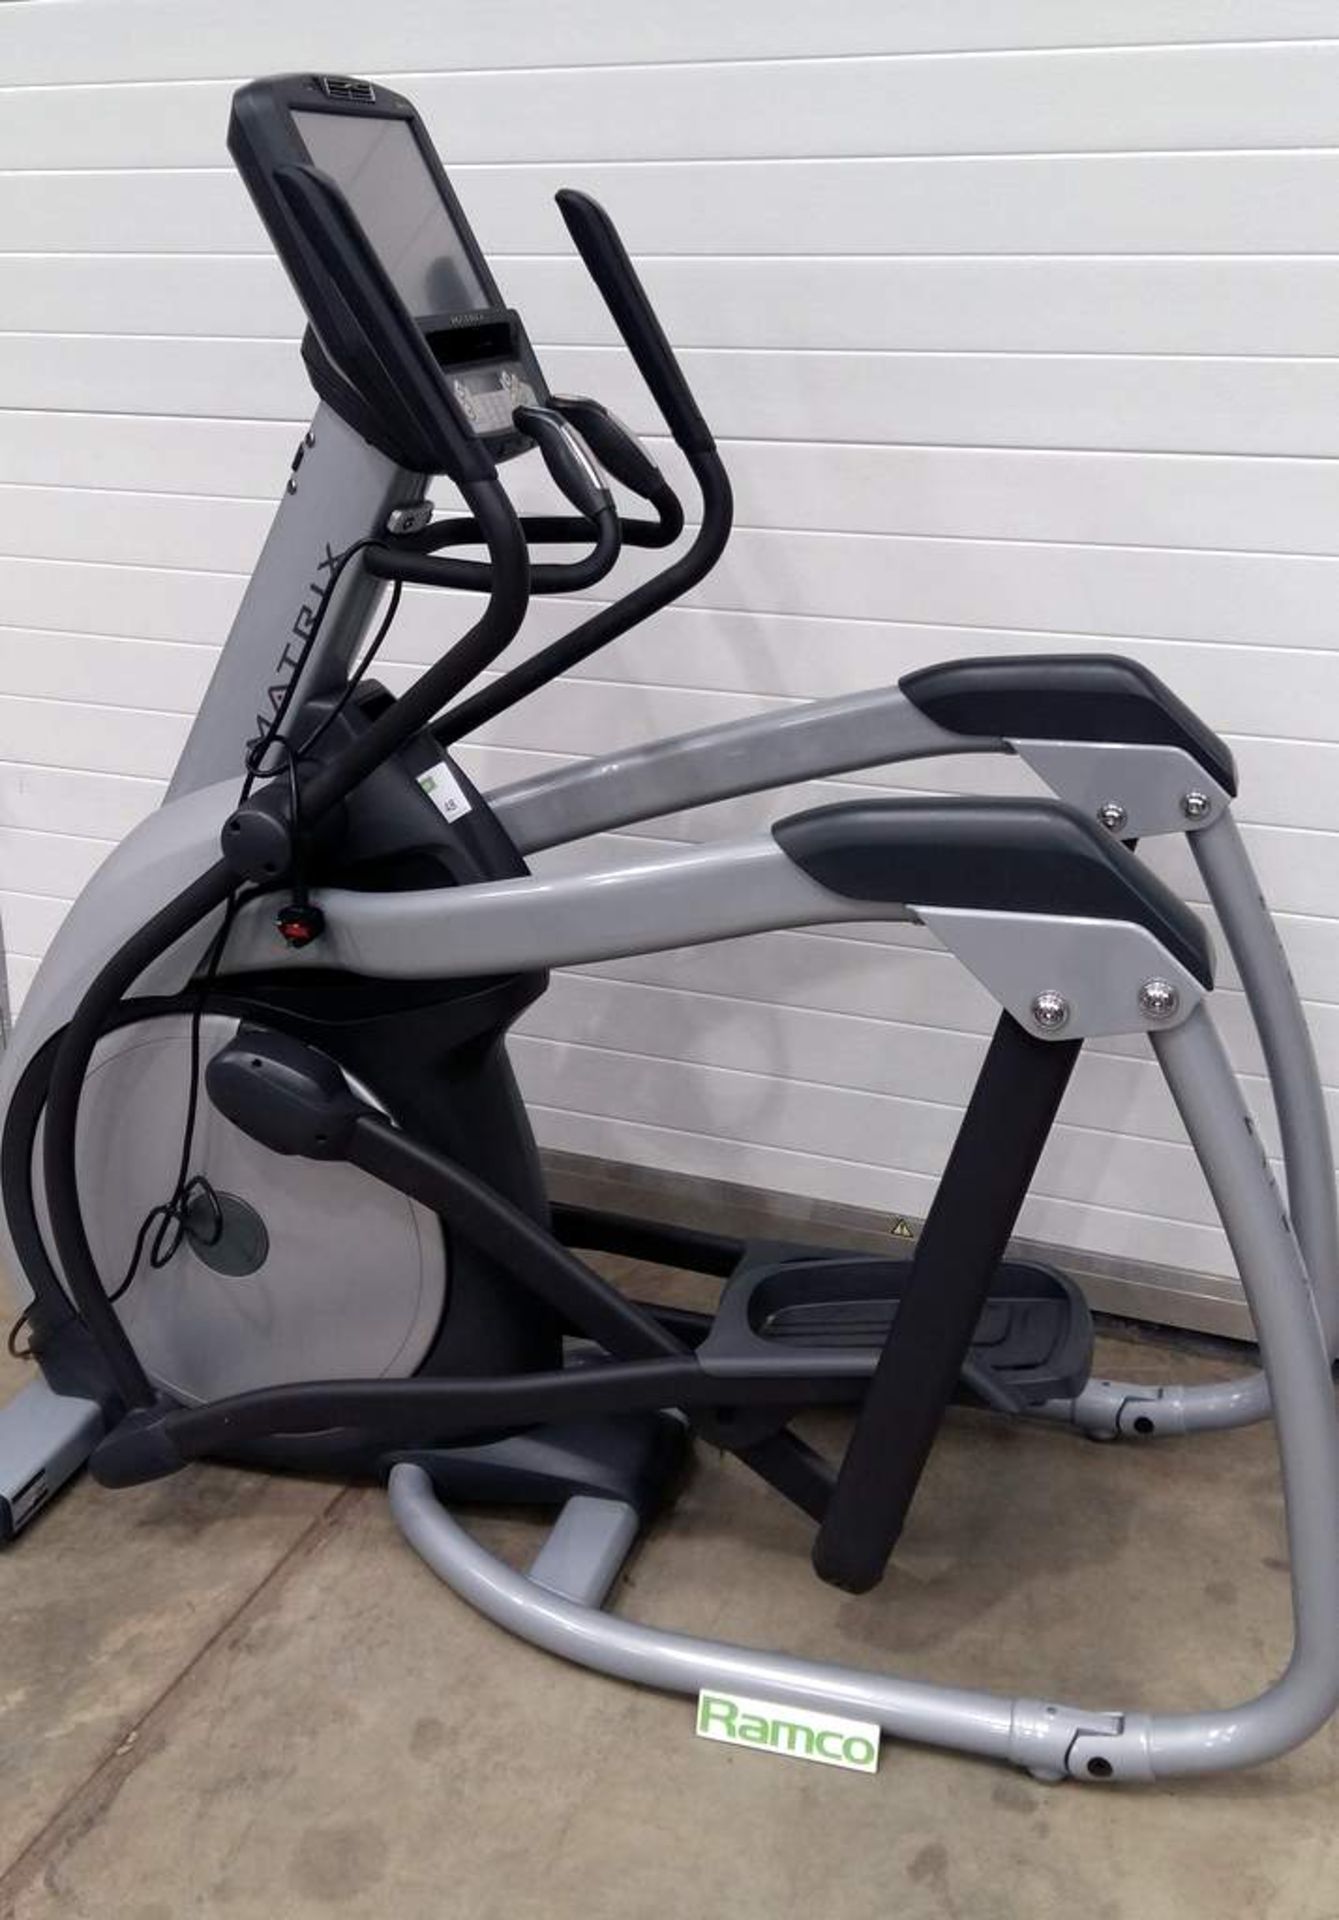 Matrix elliptical trainer with active console Model: E7xe - Max user weight 182kg - 240v - Image 3 of 18